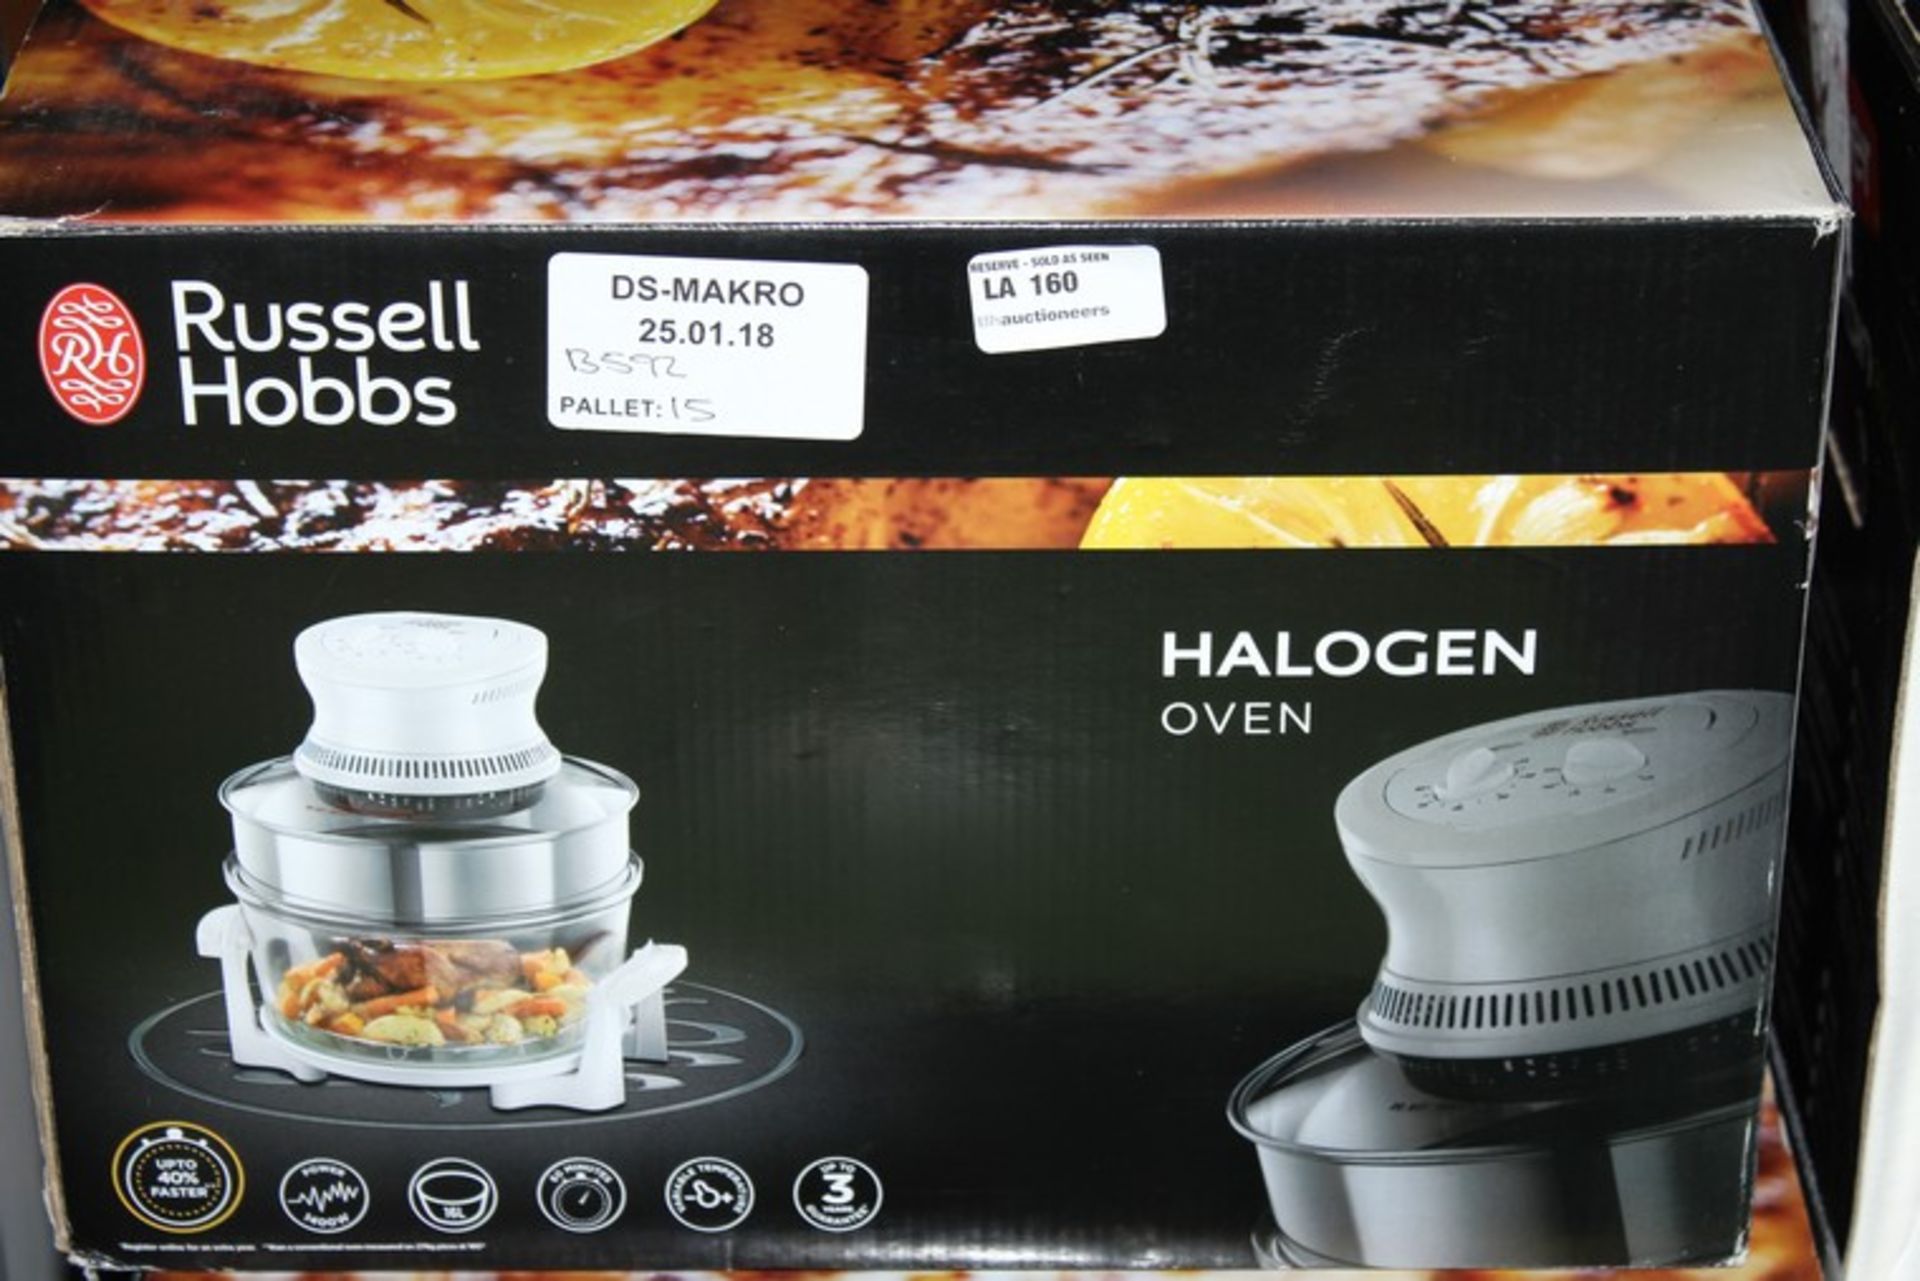 1 x RUSSELL HOBBS HALOGEN OVEN (25.01.18) (P15) *PLEASE NOTE THAT THE BID PRICE IS MULTIPLIED BY THE